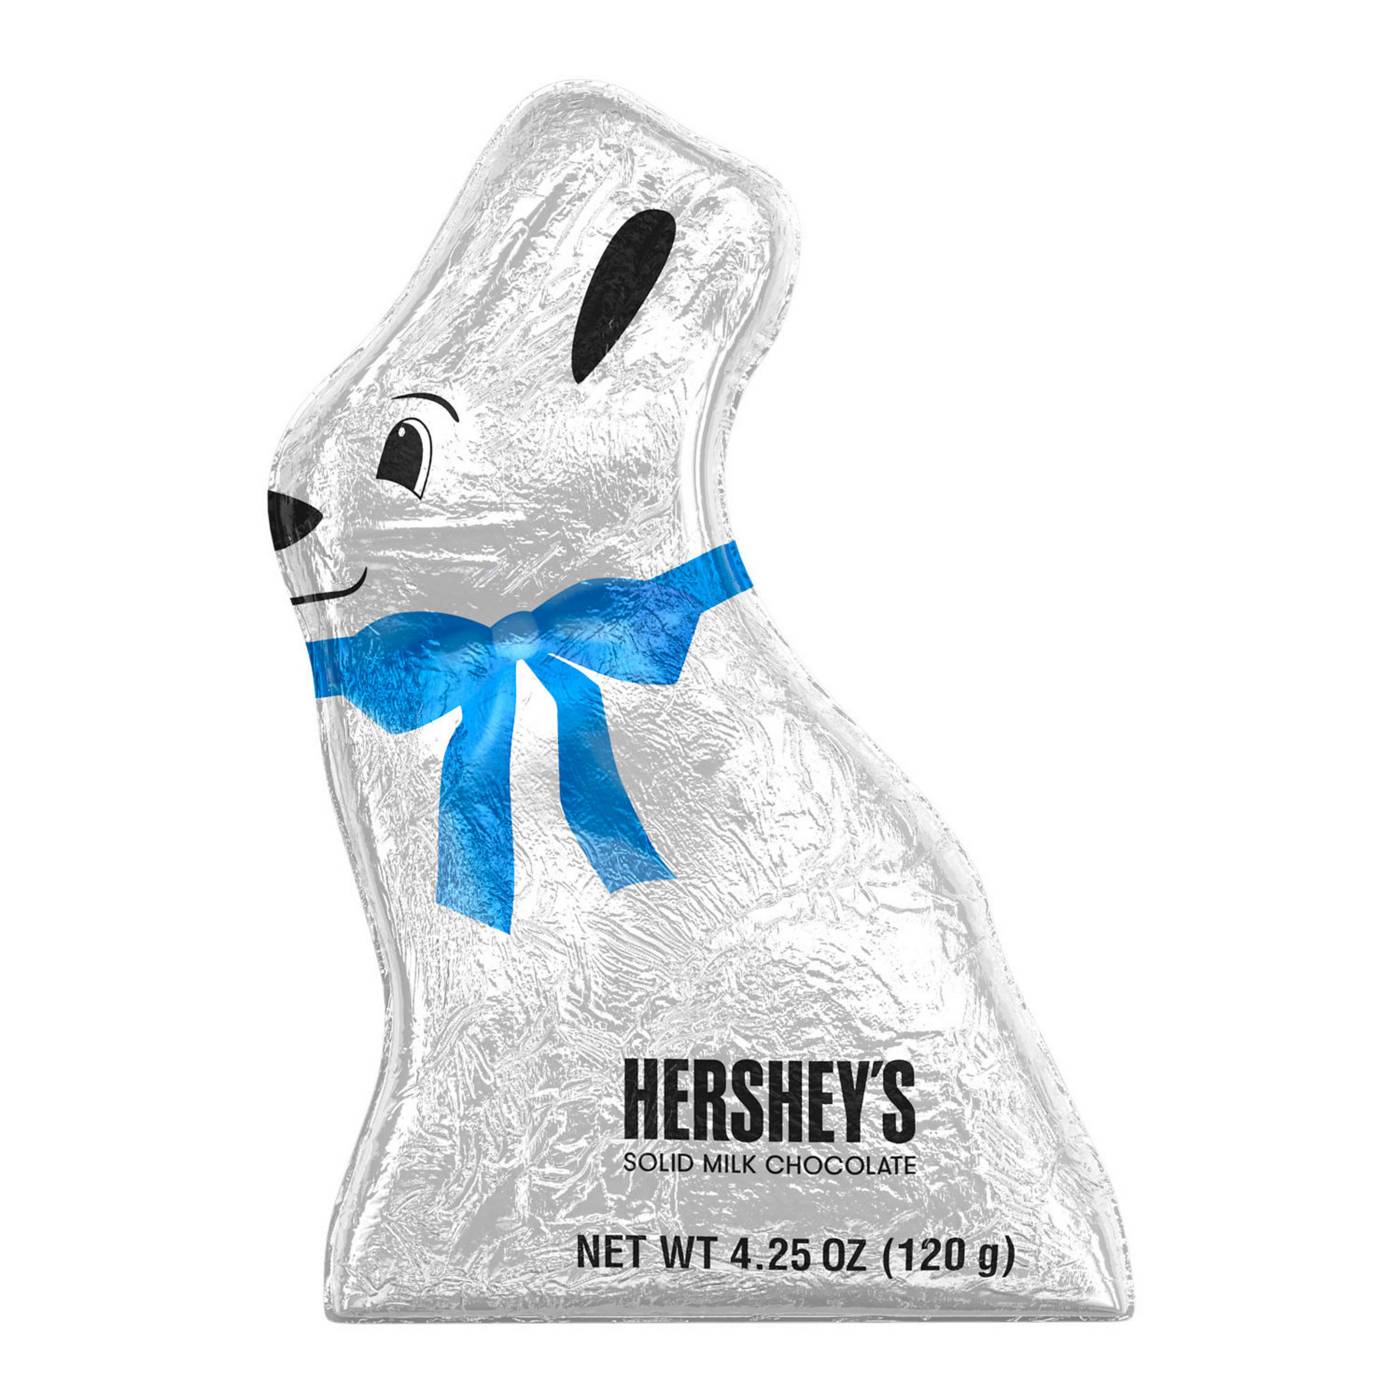 Hershey's Solid Milk Chocolate Bunny Easter Candy; image 1 of 6